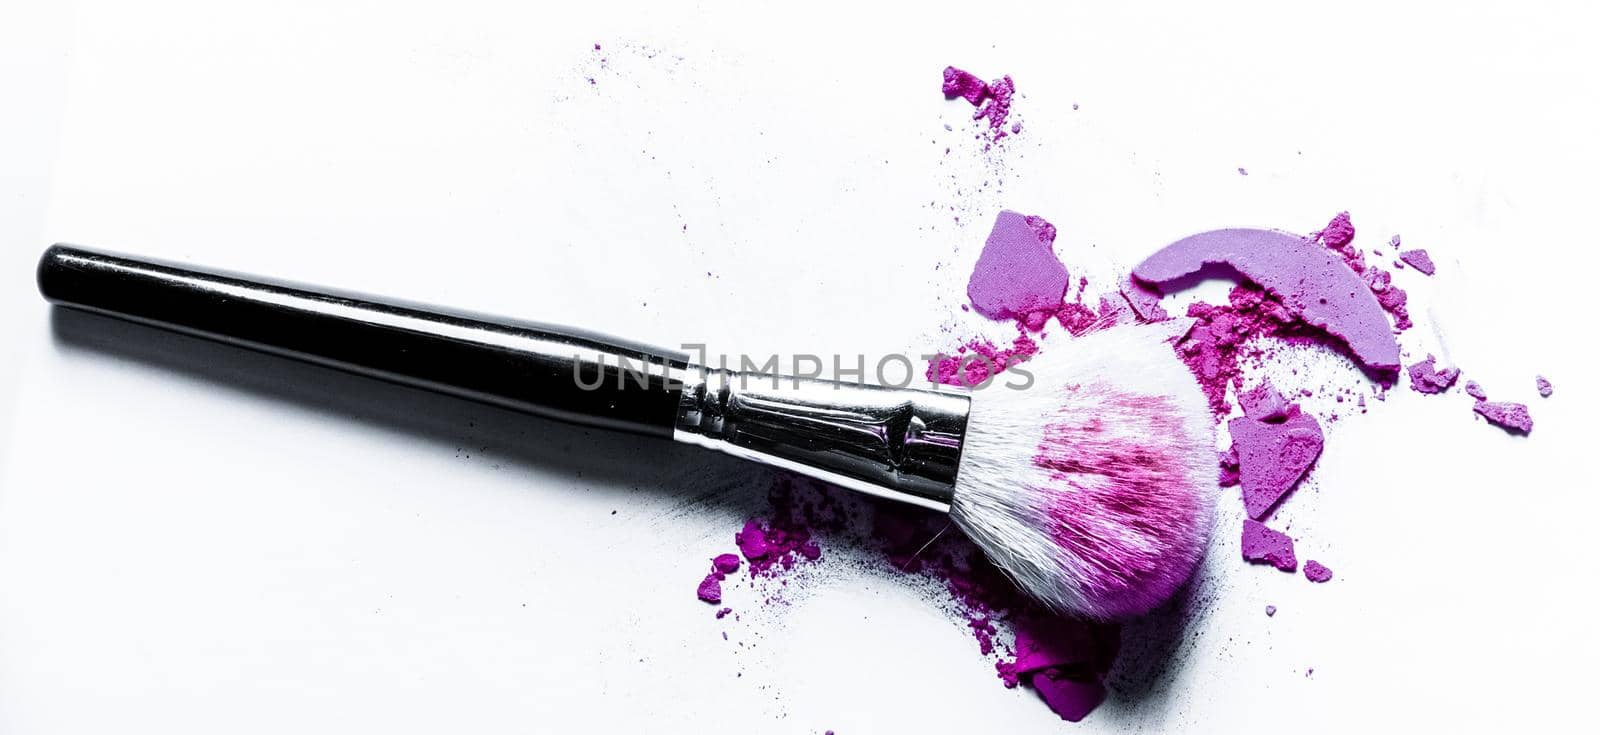 Beauty texture, cosmetic product and art of make-up concept - Brush with crushed eyeshadow and powder close-up isolated on white background